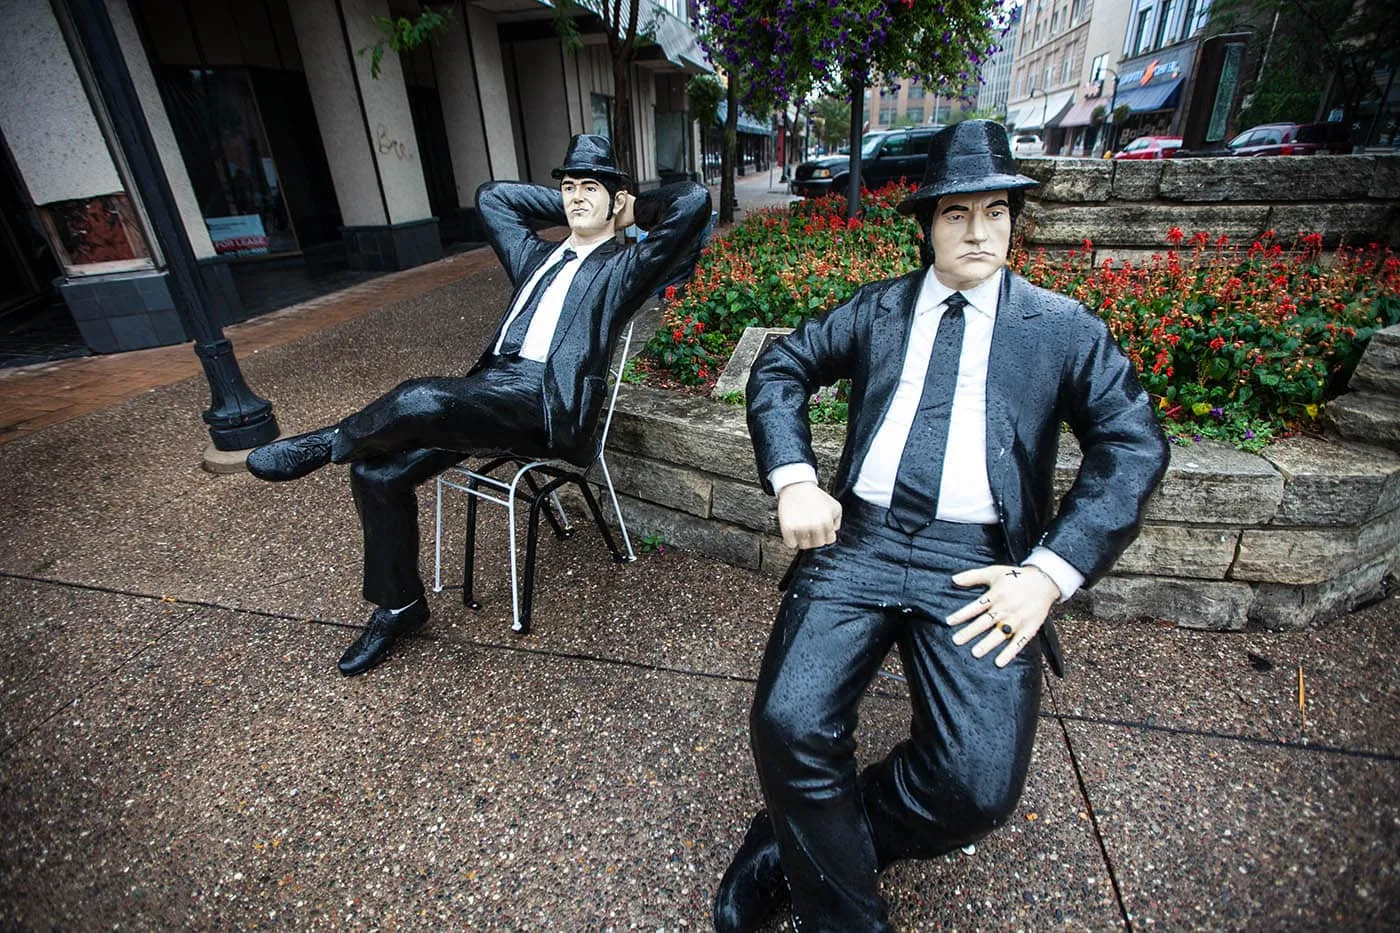 Blues Brothers Statue in Rock Island, Illinois